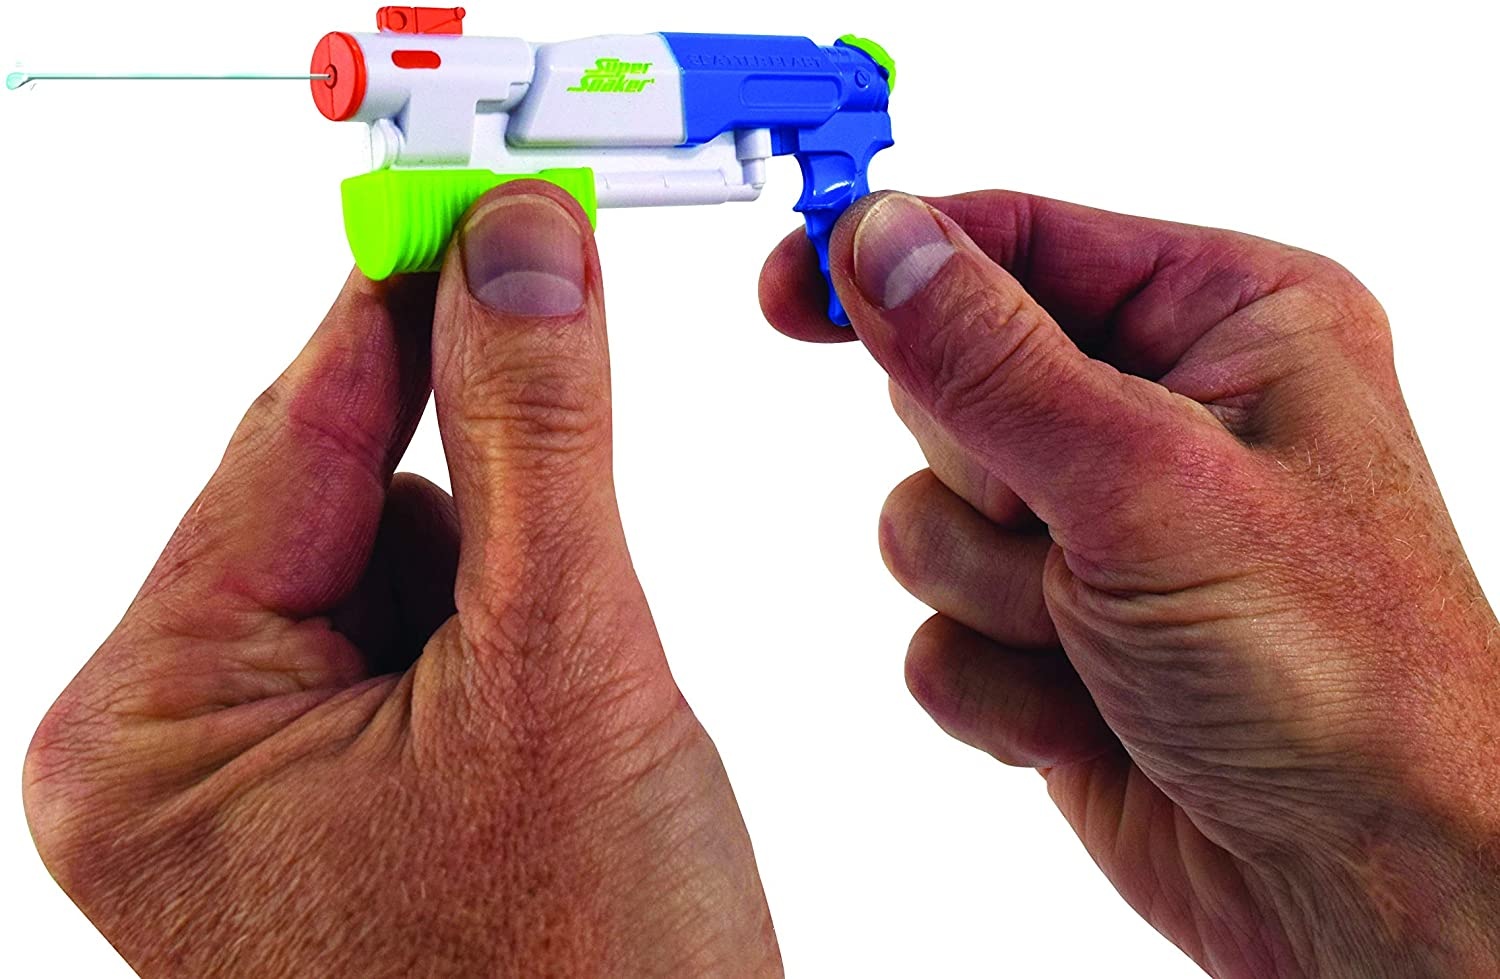 Details about   Hasbro Worlds Smallest Nerf Super Soaker Yes It Works!!! 